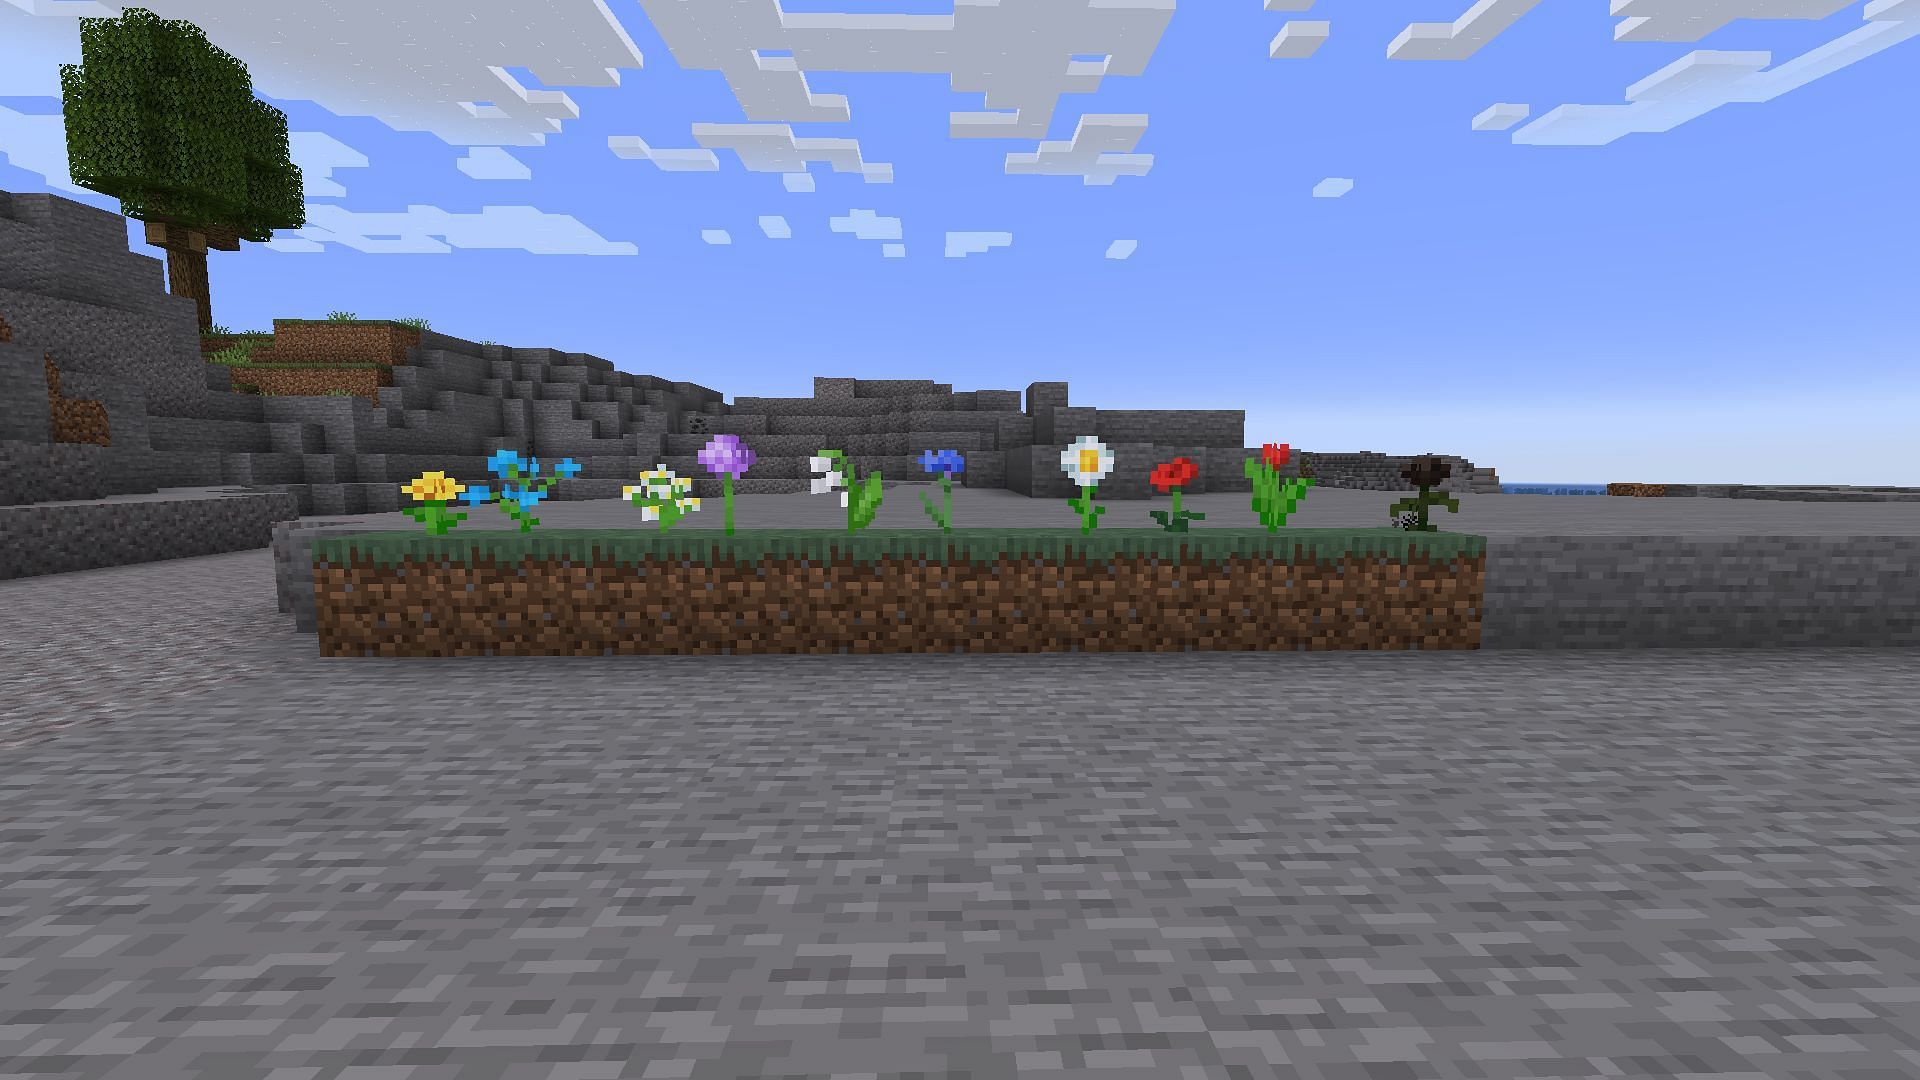 The ten flowers that can make suspicious stew (Image via Minecraft)